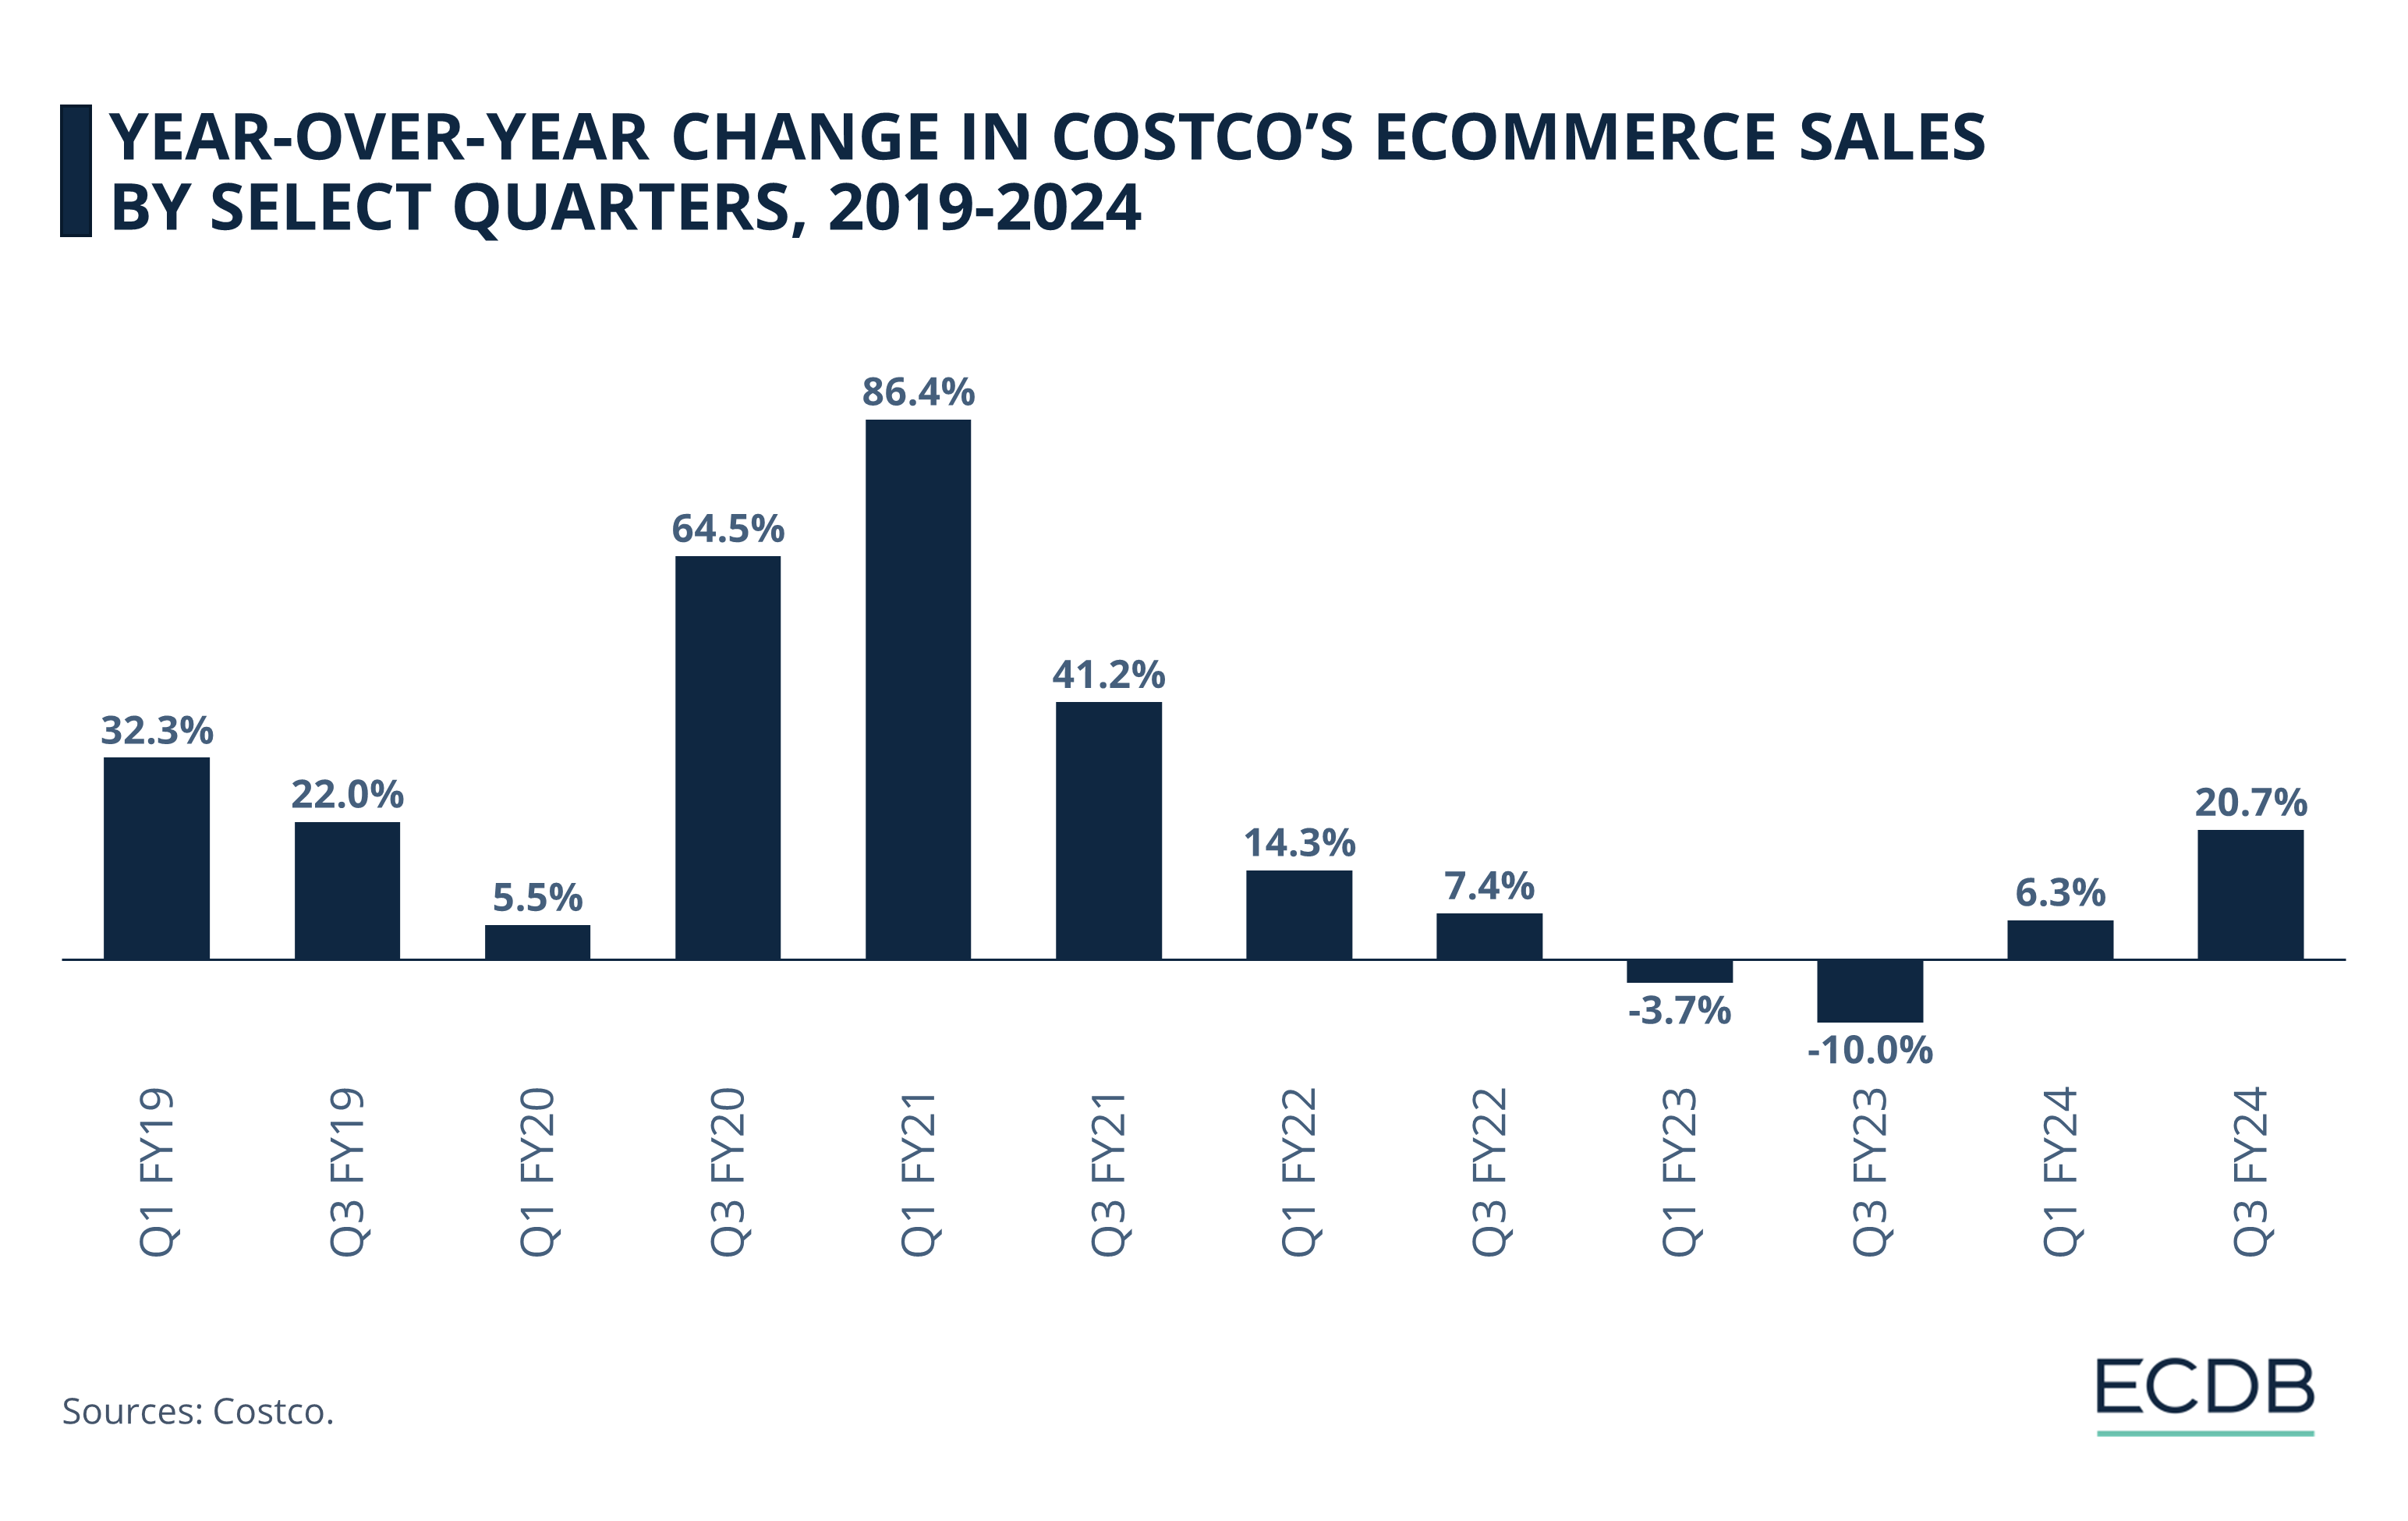 Year-Over-Year Change in Costco’s eCommerce Sales by Select Quarters, 2019-2024